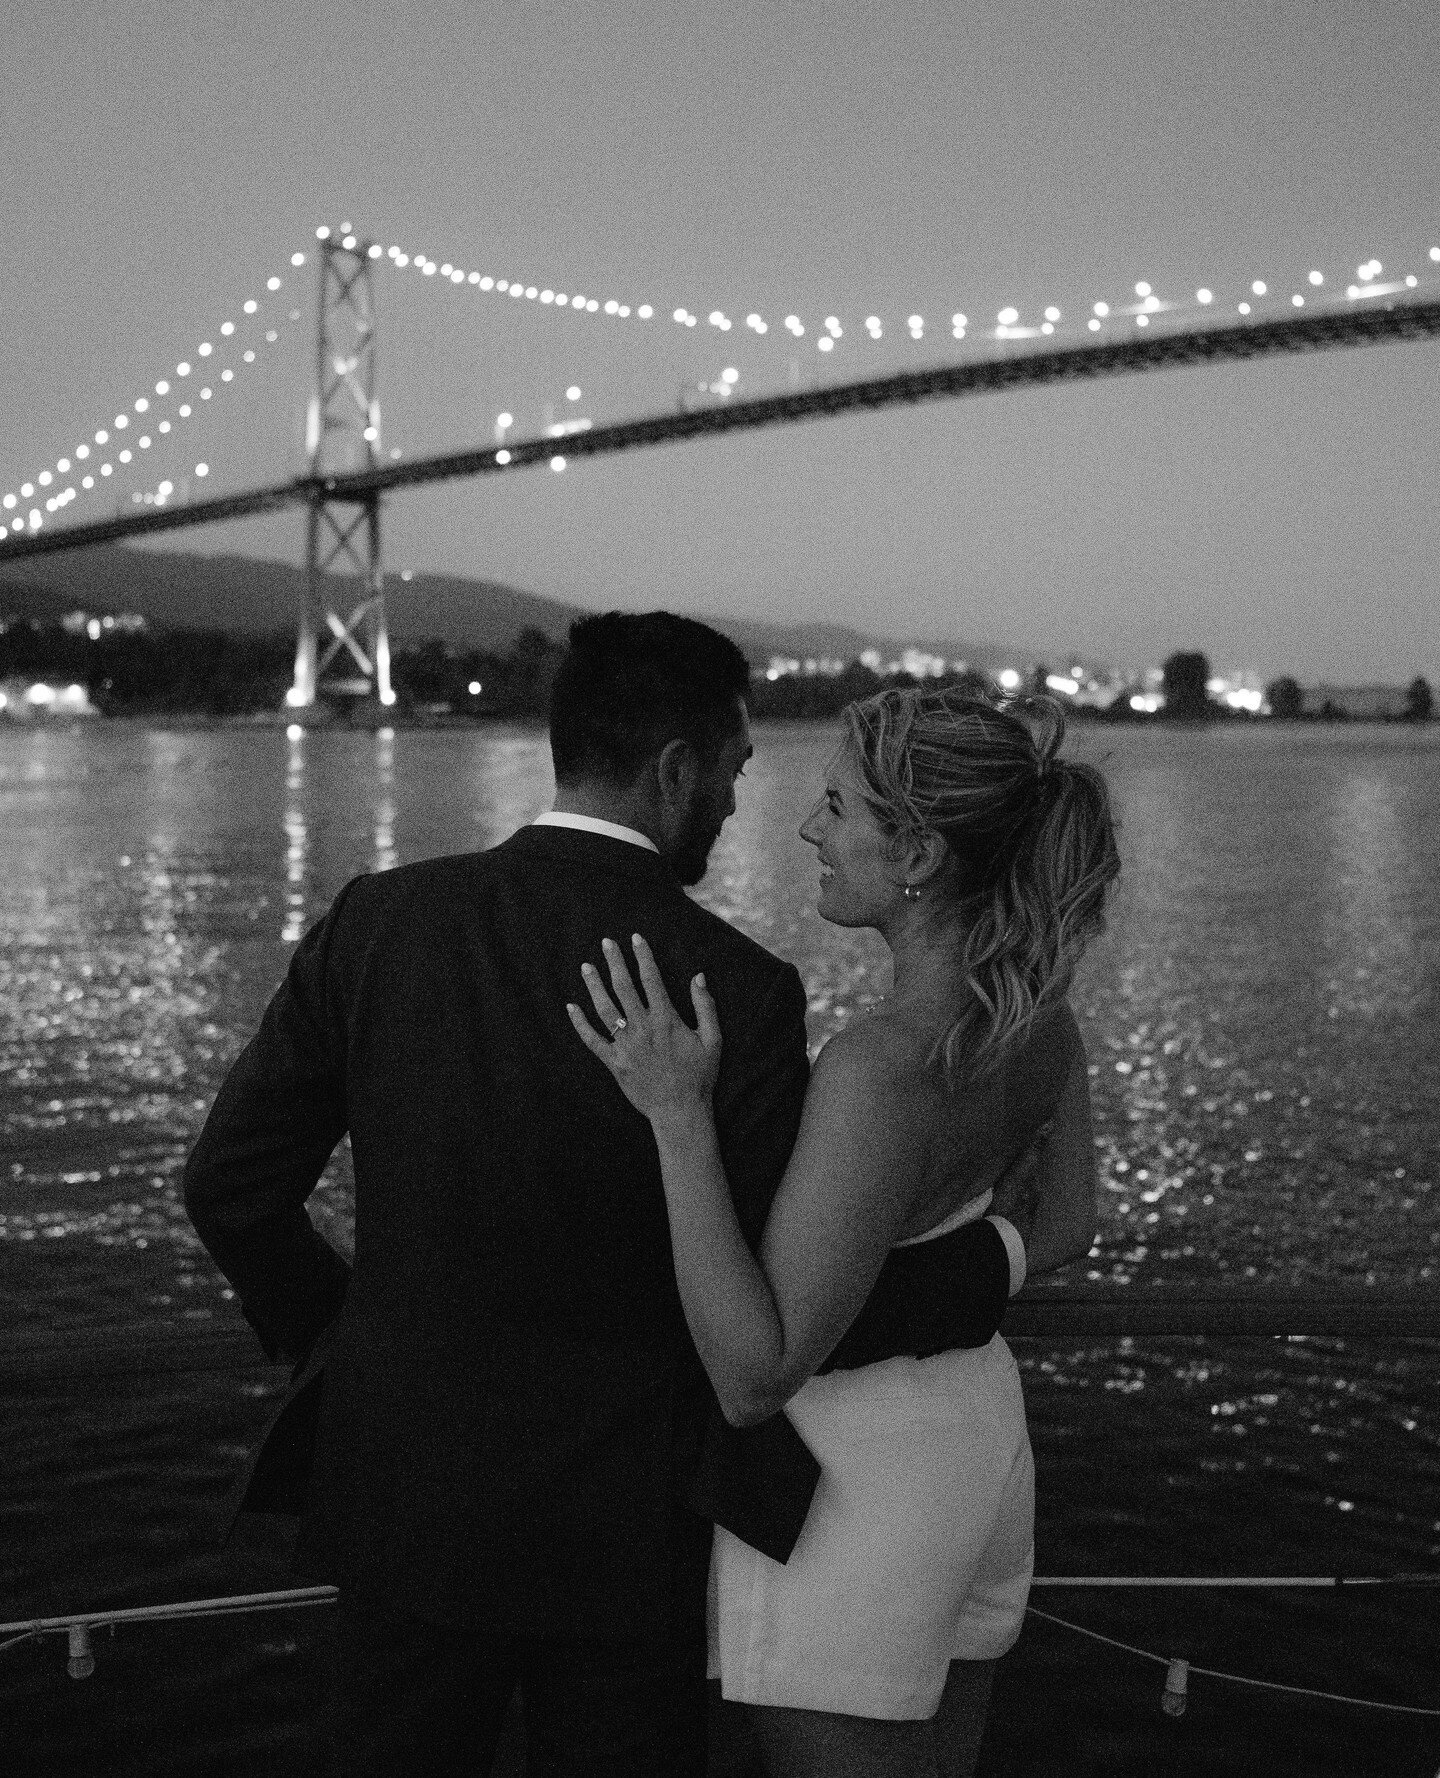 Sailing into forever under the starlit sky, with the city's glow as witness to our love. Alexa &amp; Lucas ✨⁠
⁠
⁠
Photography &amp; Videography: @beautifullifebc⁠
Wedding Planner: @alyarmstrongevents⁠
Floral: @flowerfactory⁠
Decor: @debuteventdesign⁠